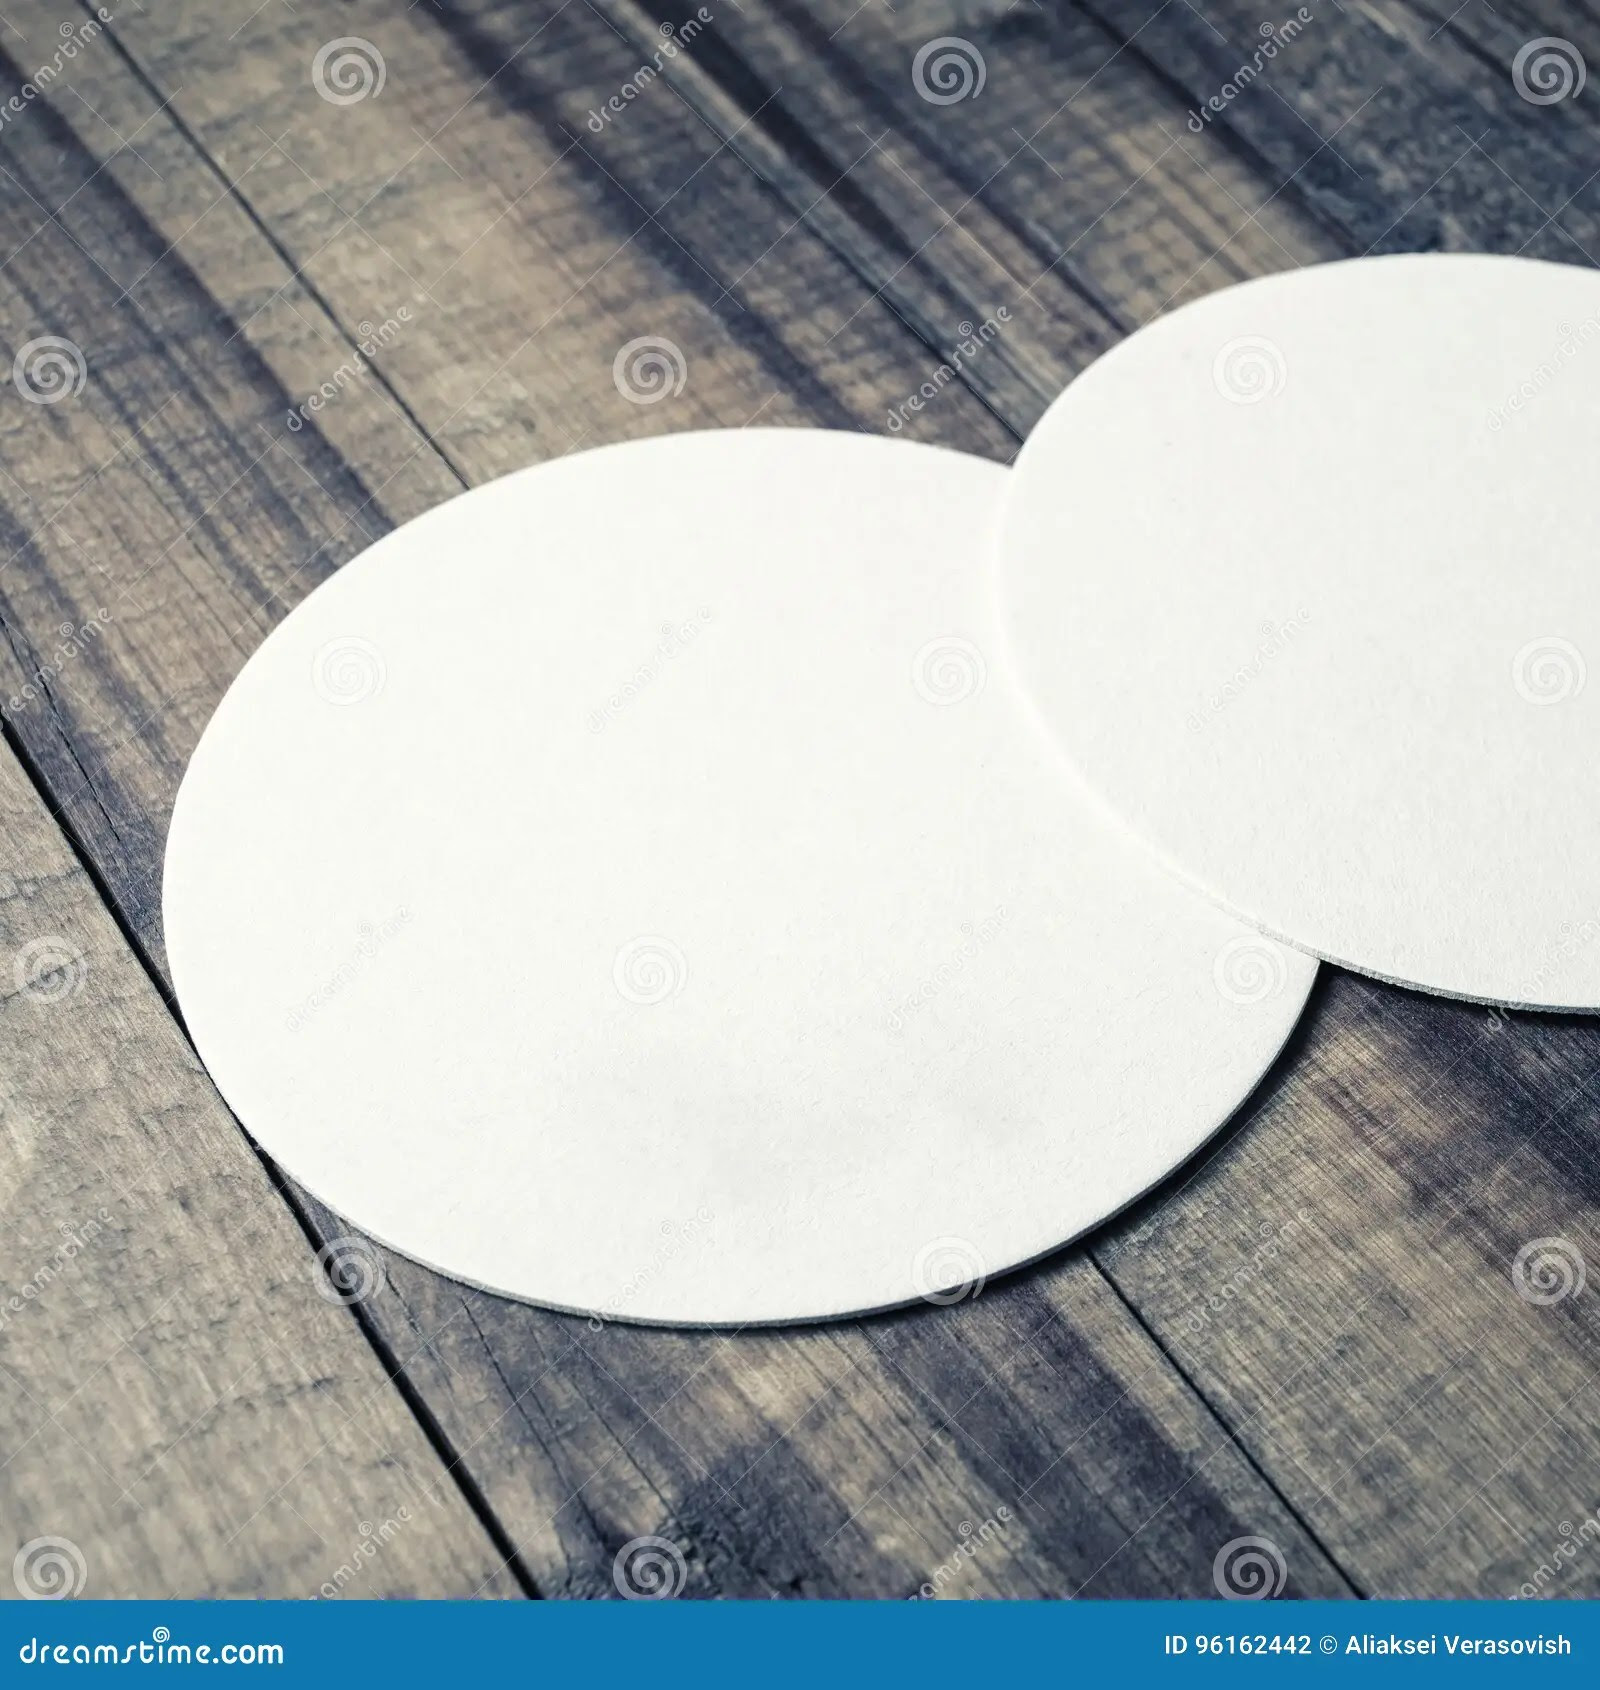 Two beer coasters stock photo. Image of objects, arabica 96162442